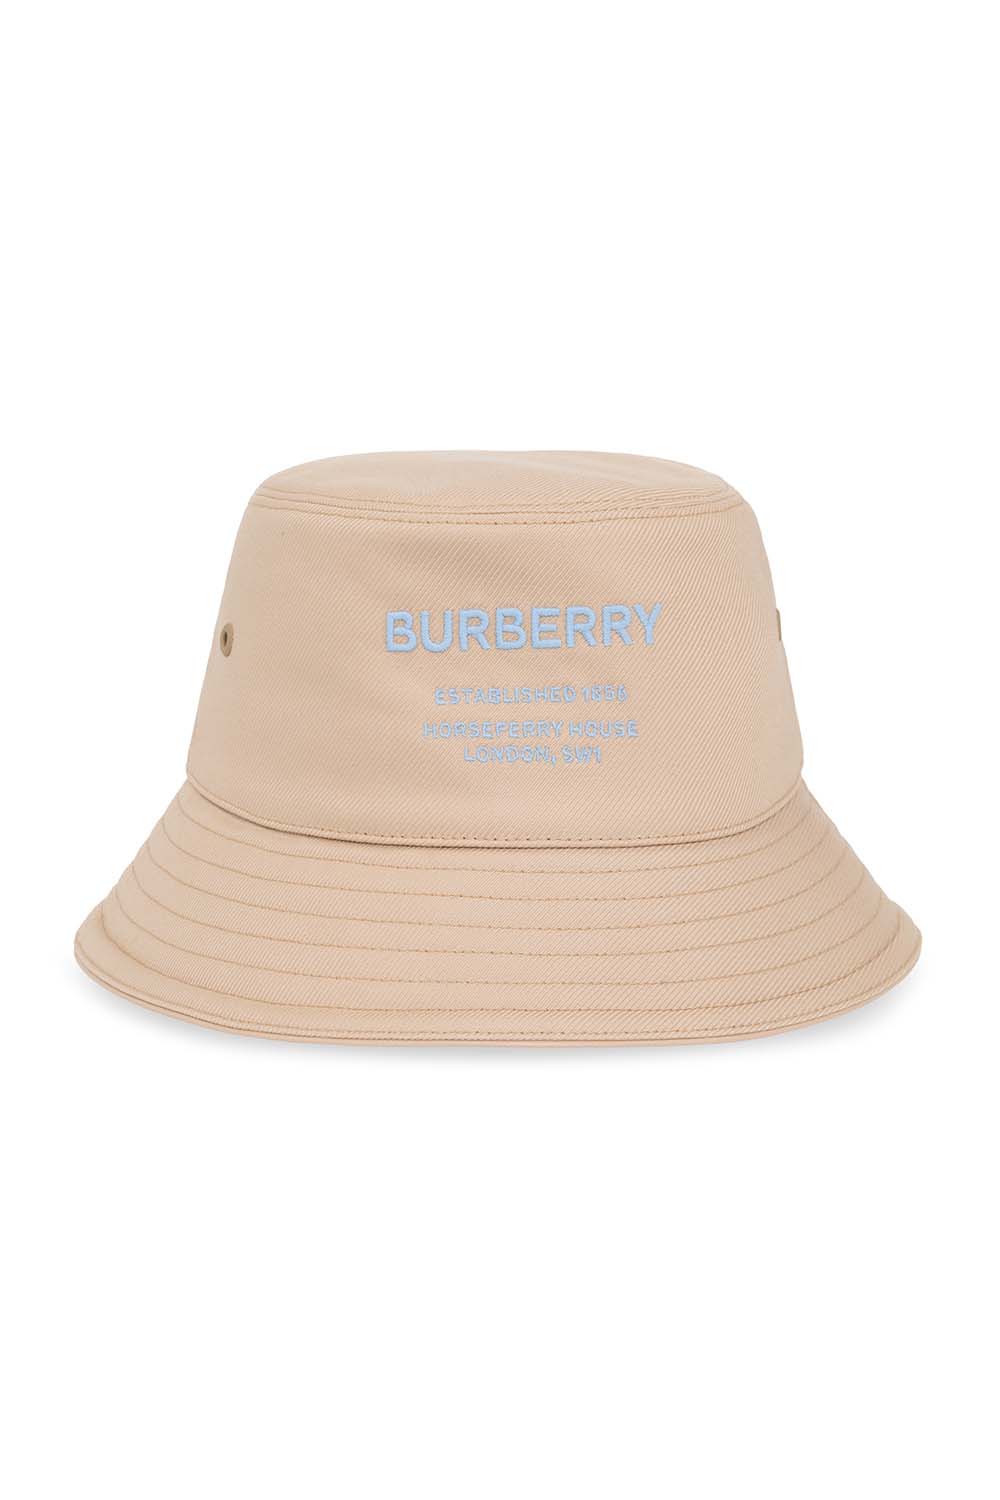 Burberry Logo Embroidered Cotton Bucket Hat Soft Fawn - US